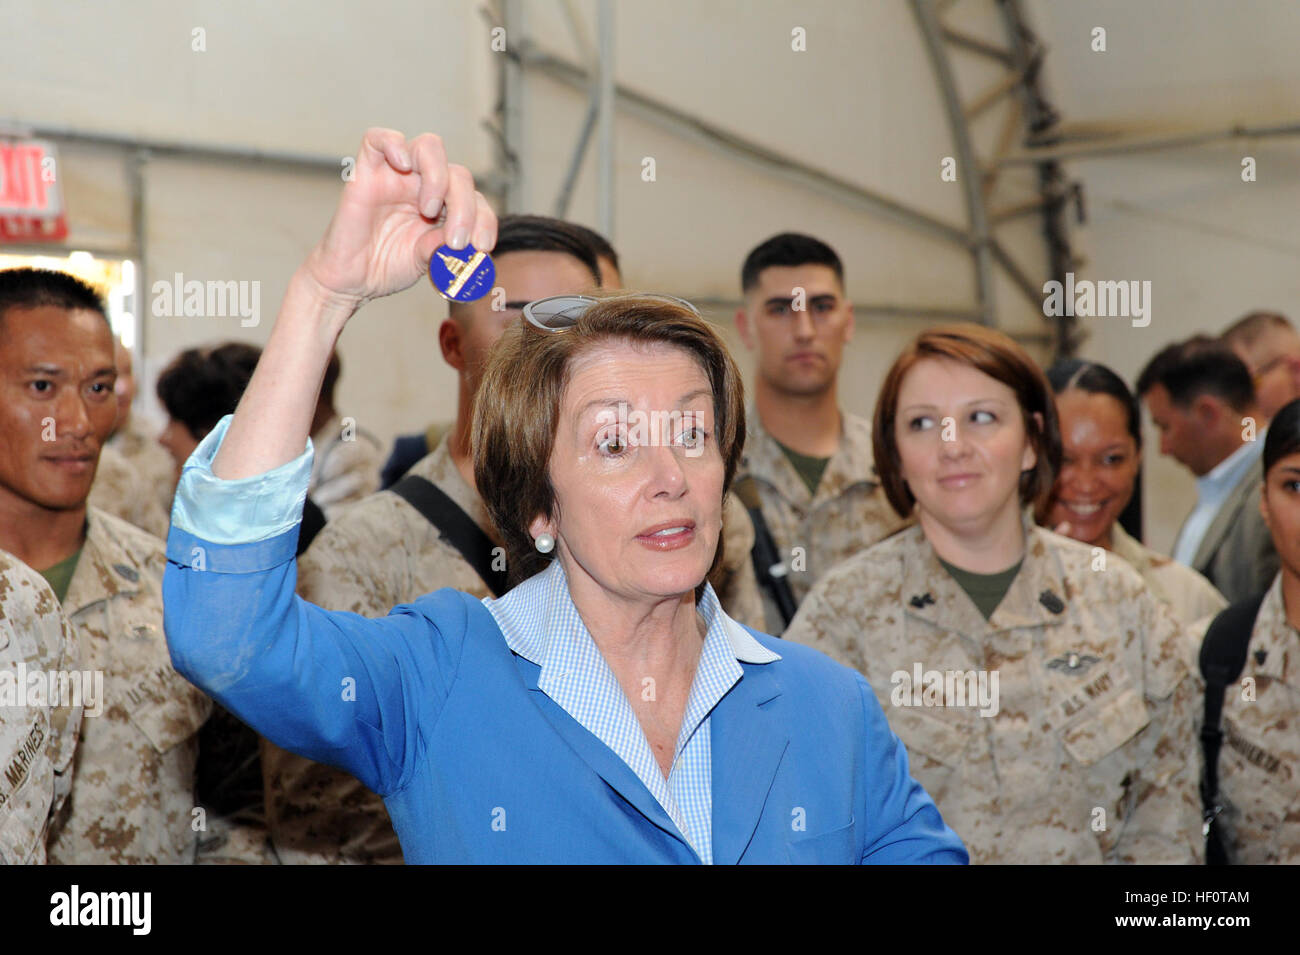 House Democratic Leader, Nancy Pelosi (D-Calif.) displays a congressional coin to troops on Camp Leatherneck during a Mother's Day visit to Afghanistan in which Pelosi and five other congresswomen met with the troops. Flickr - DVIDSHUB - Congresswomen visit troop on Mother's Day (Image 2 of 4) Stock Photo